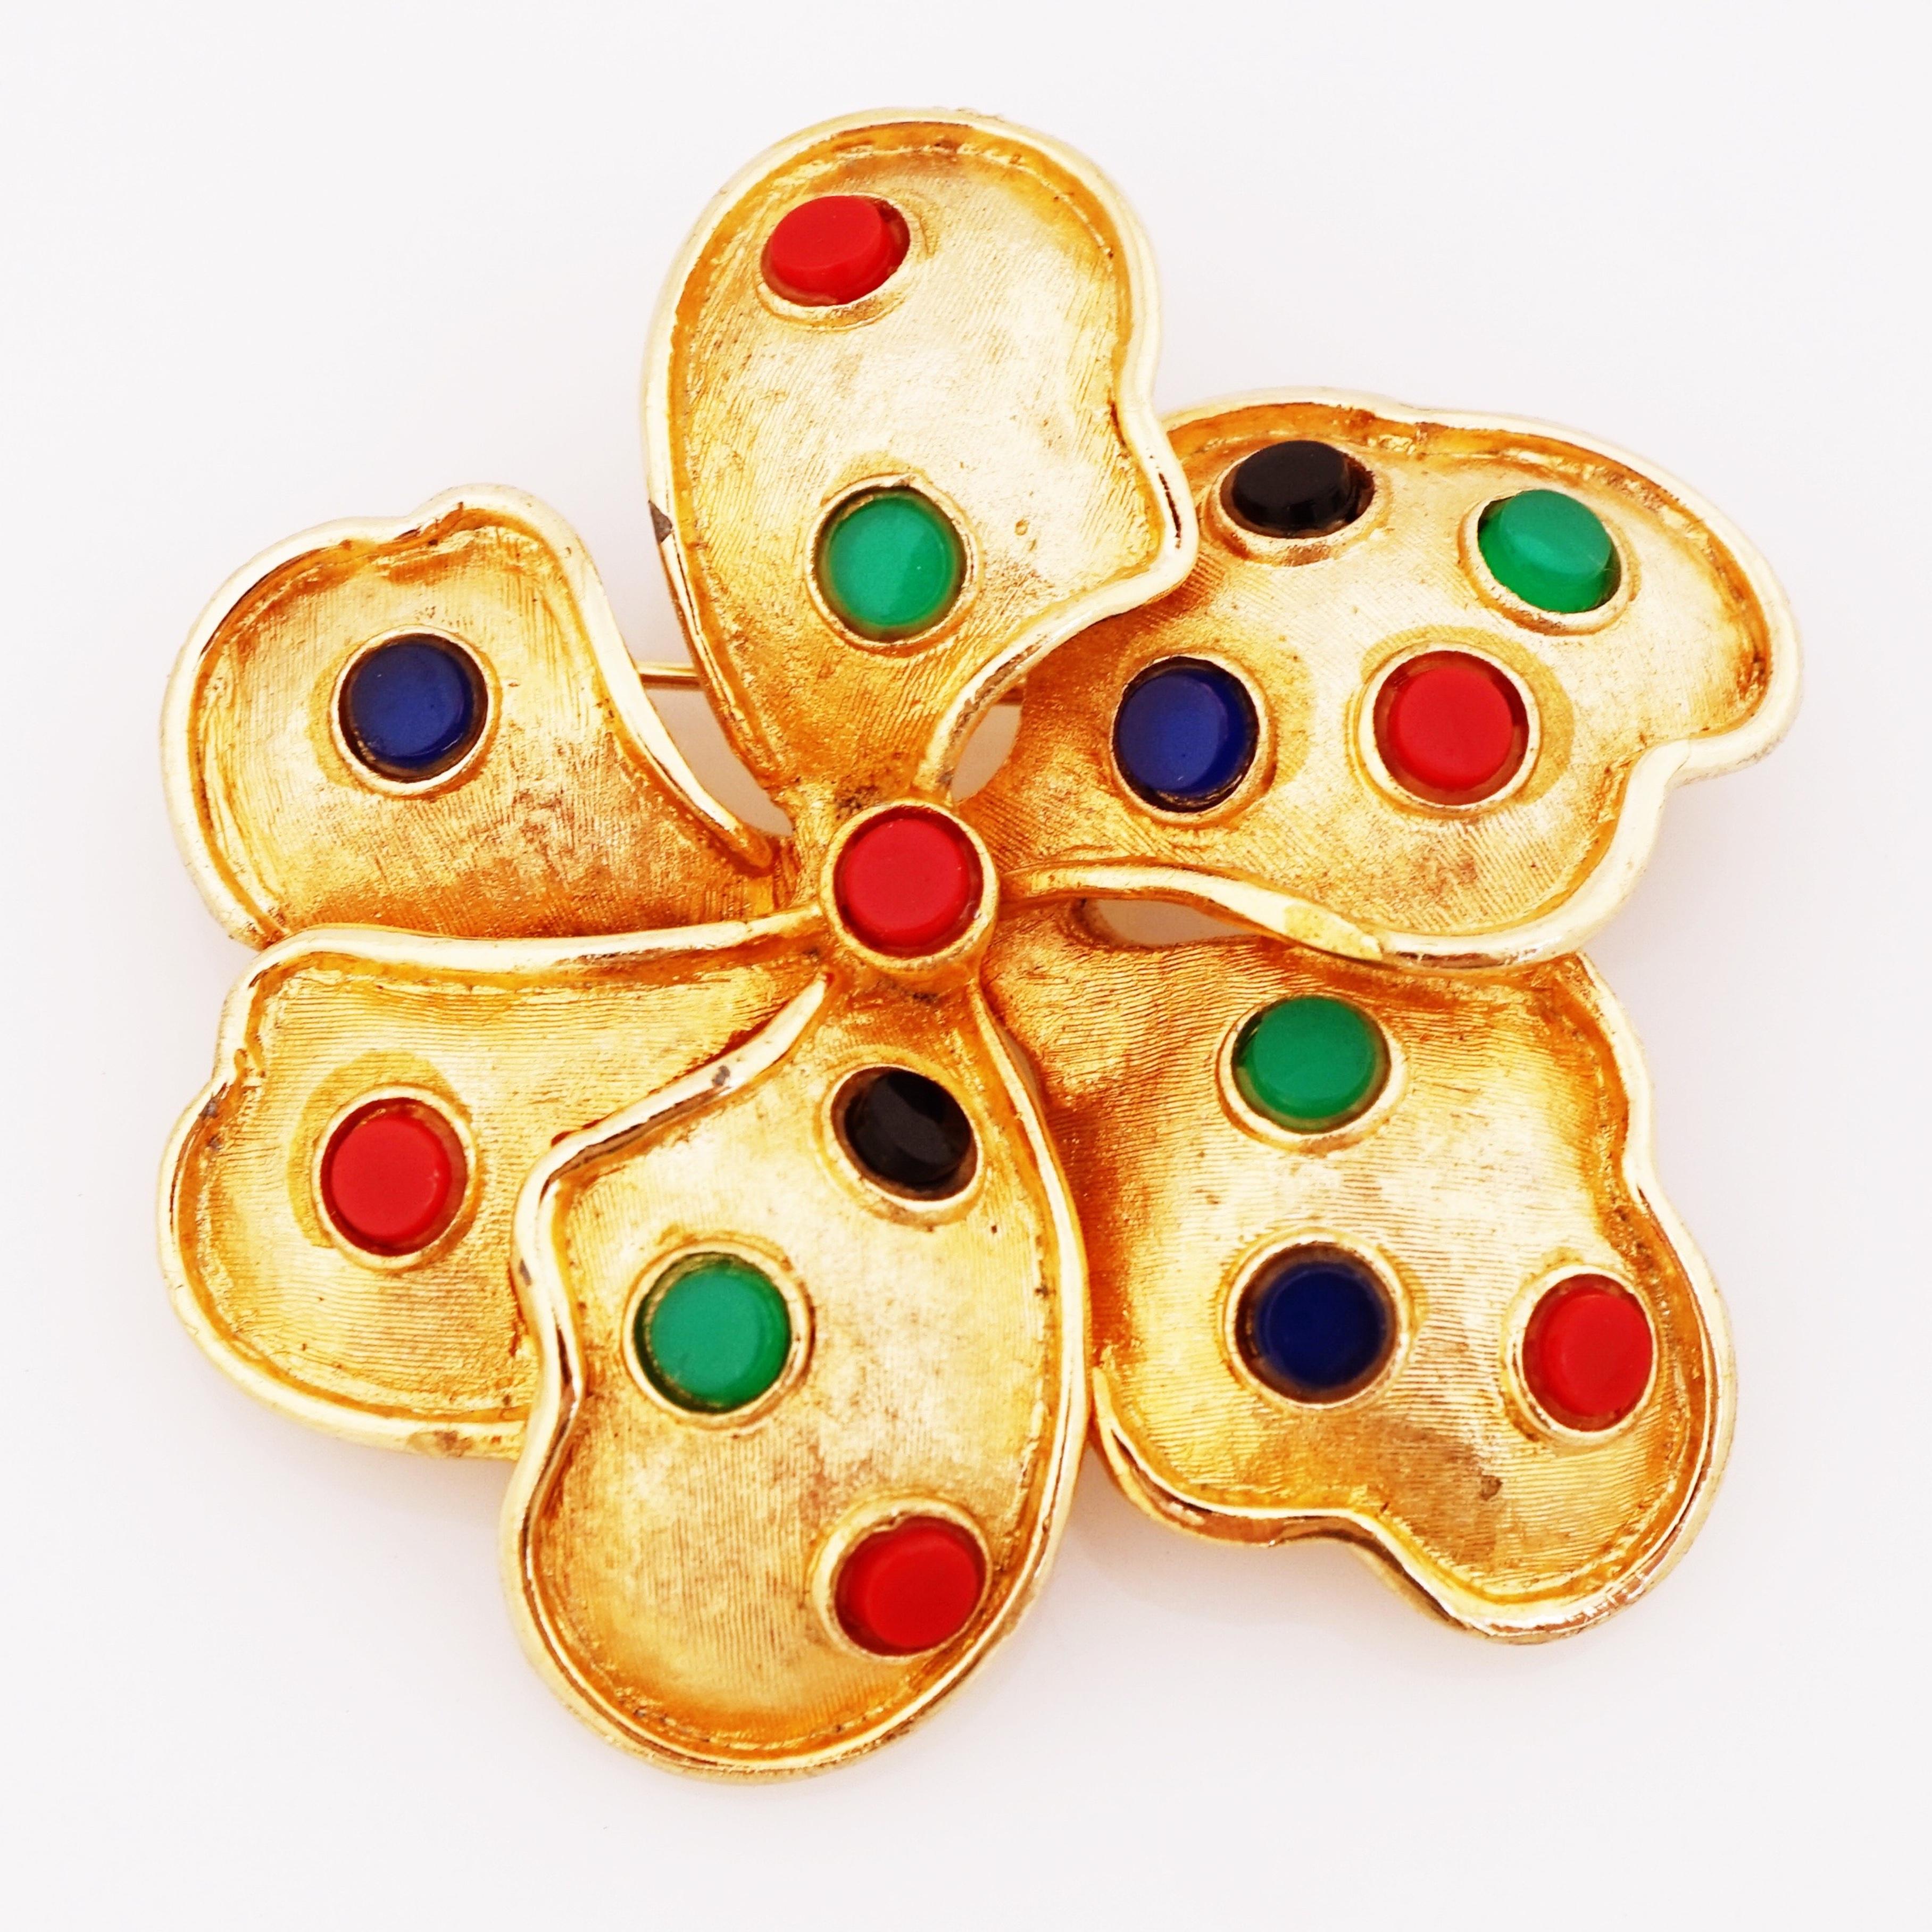 Modern Gilded Mughal Style Flower Brooch With Jewel Tone Cabochons By Kramer, 1960s